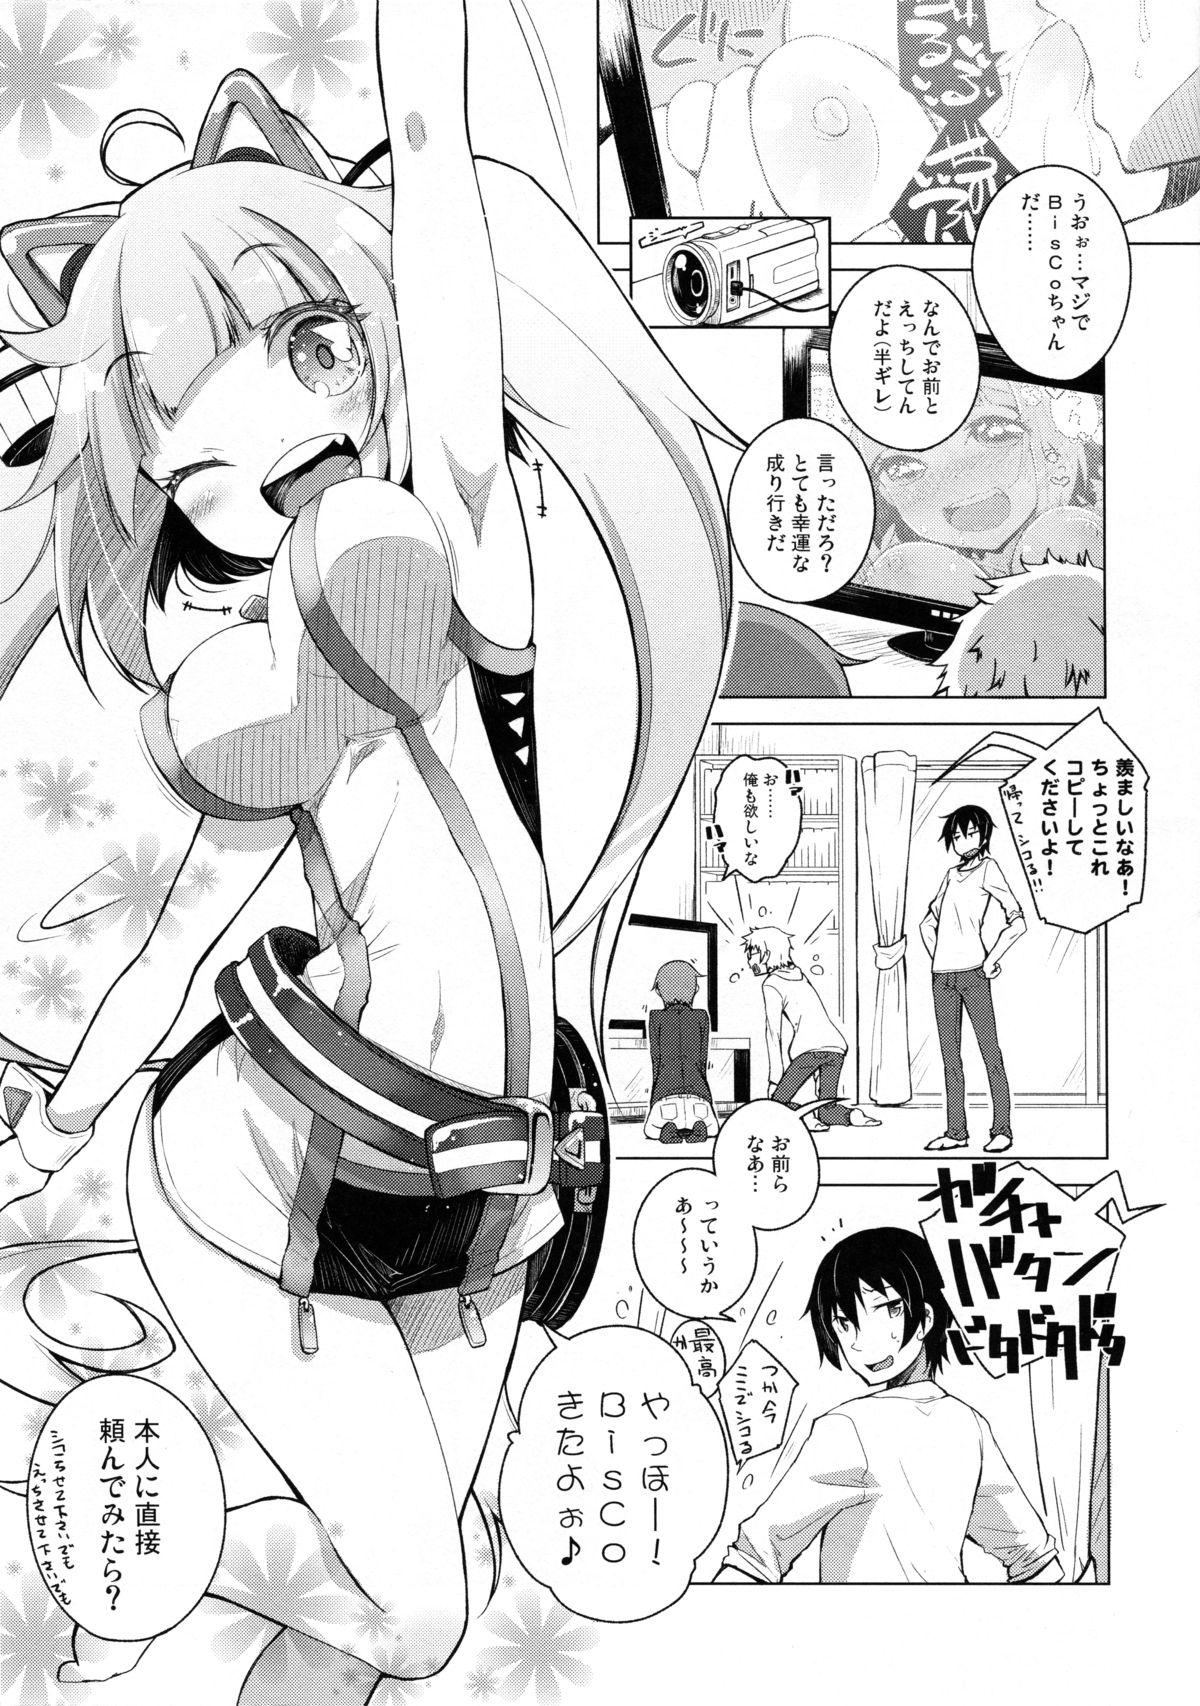 From Honey Punch! - Beatstream Foreplay - Page 2